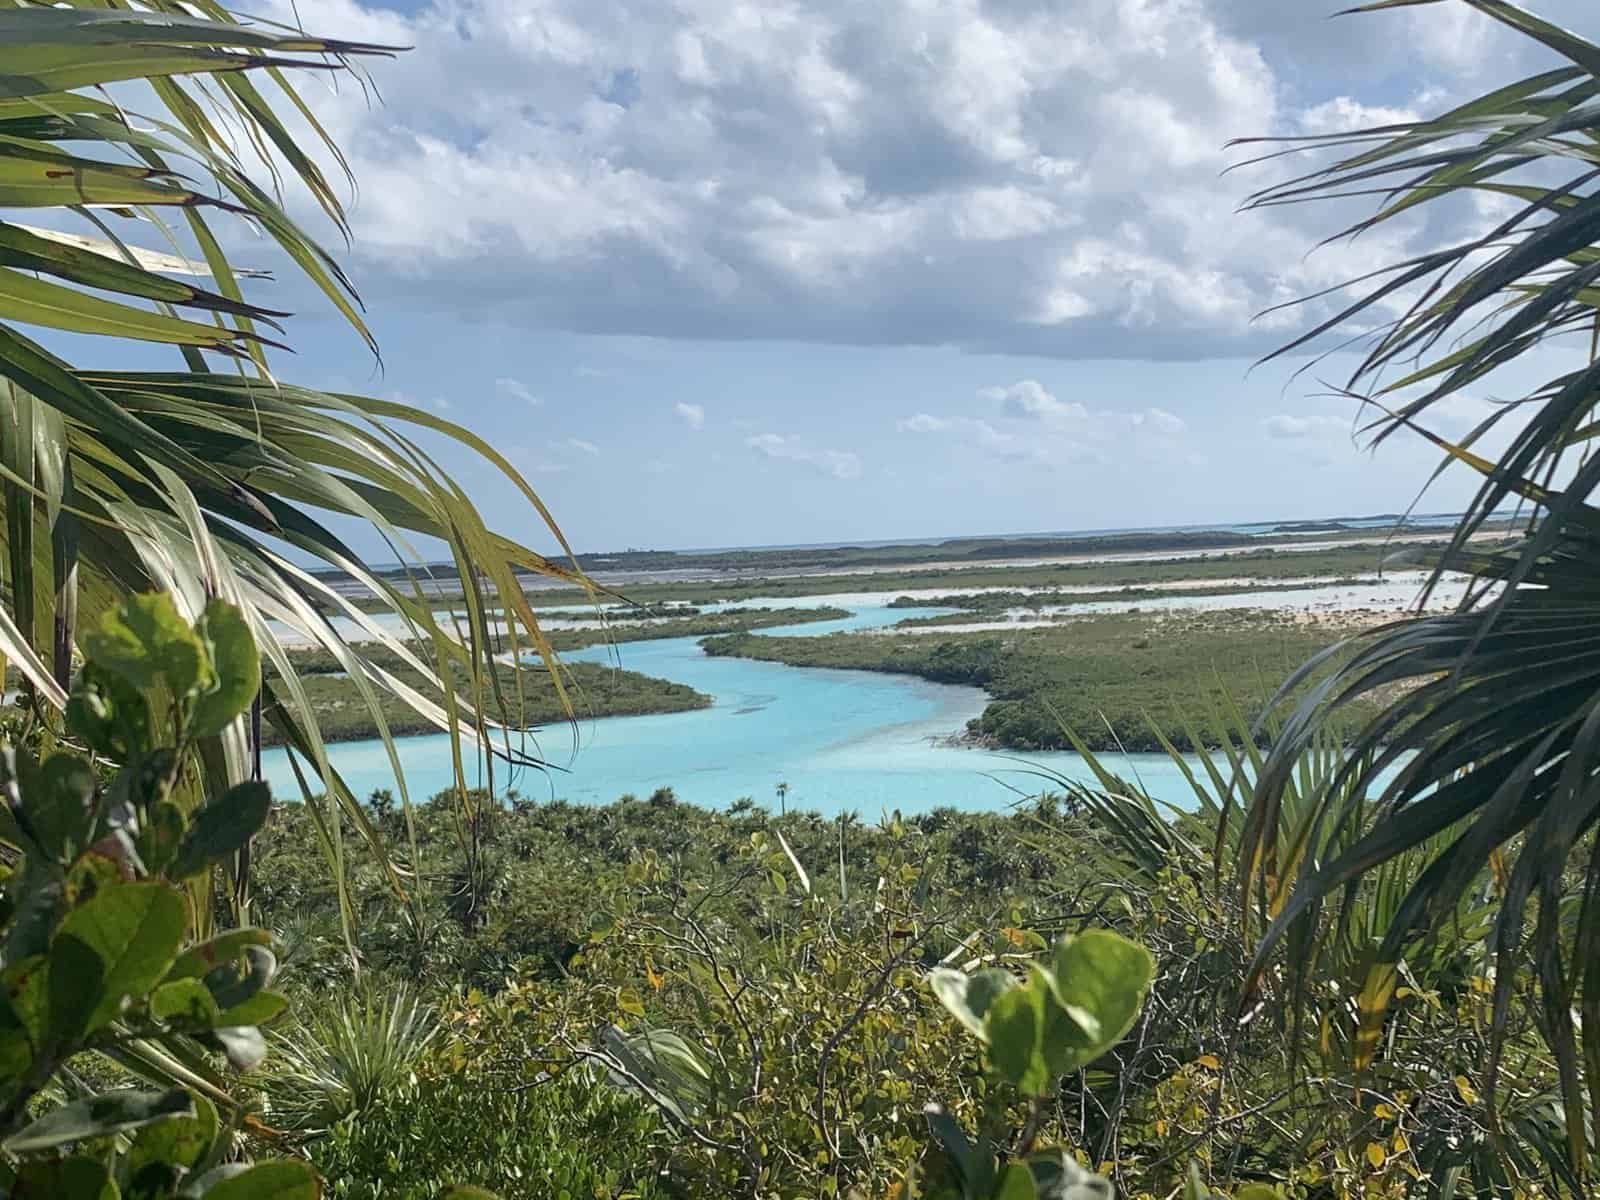 Land and Sea Park, Bahamas view of blue water from a hill